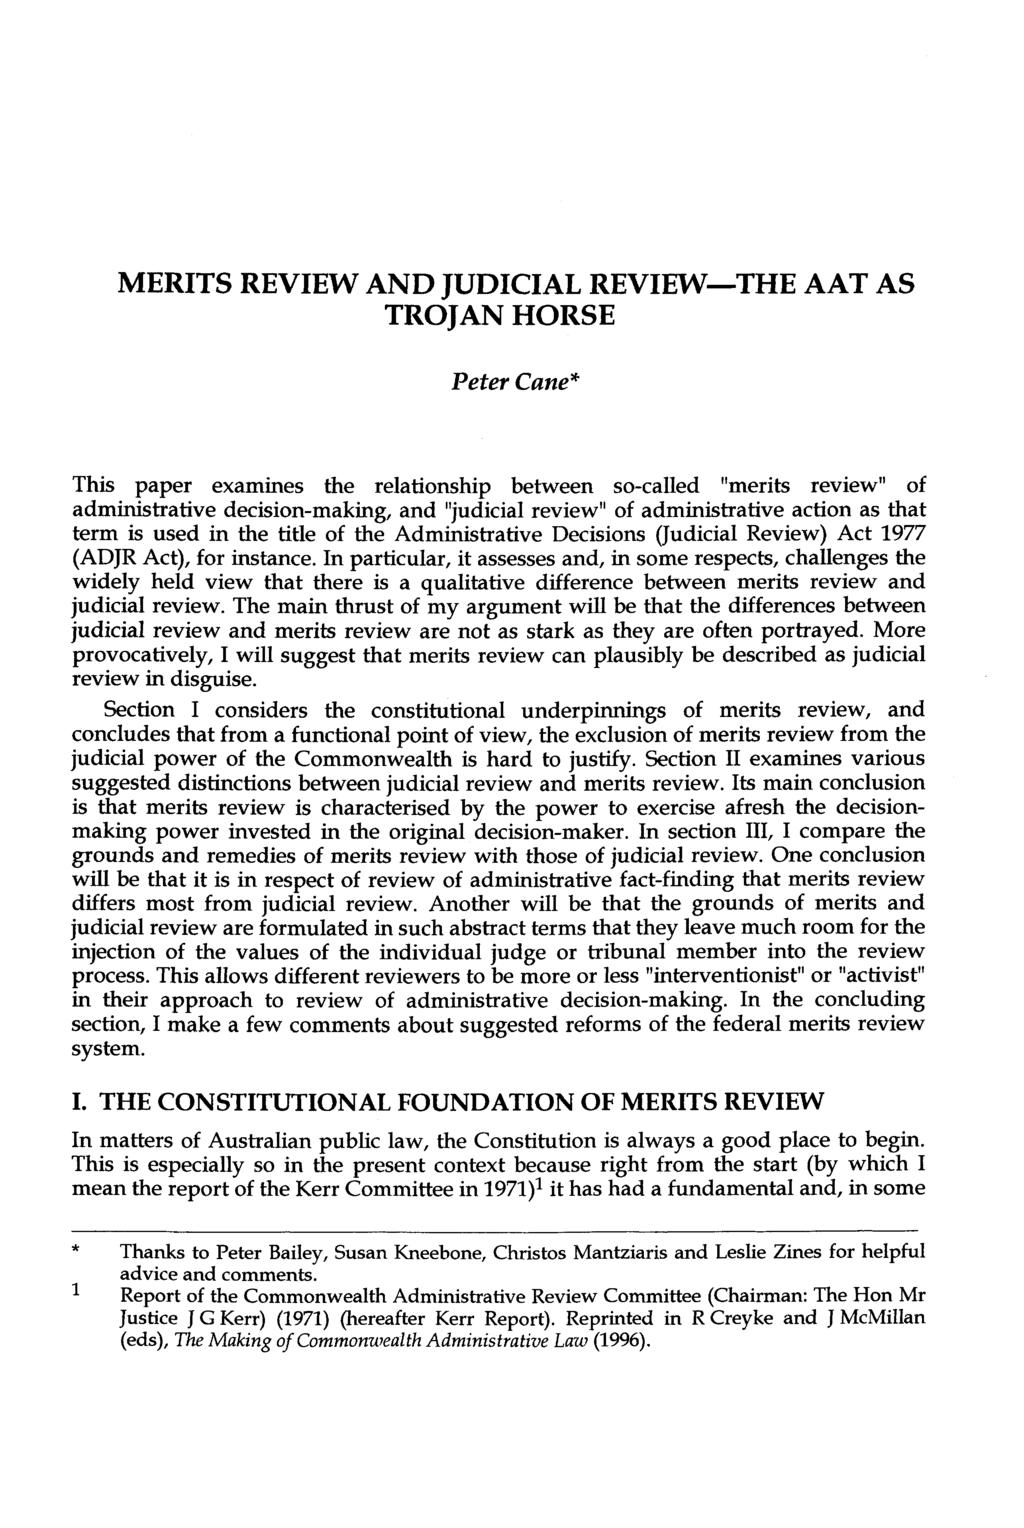 MERITS REVIEW AND JUDICIAL REVIEW-THE AAT AS TROJAN HORSE Peter Cane* This paper examines the relationship between so-called "merits review" of administrative decision-making, and "judicial review"